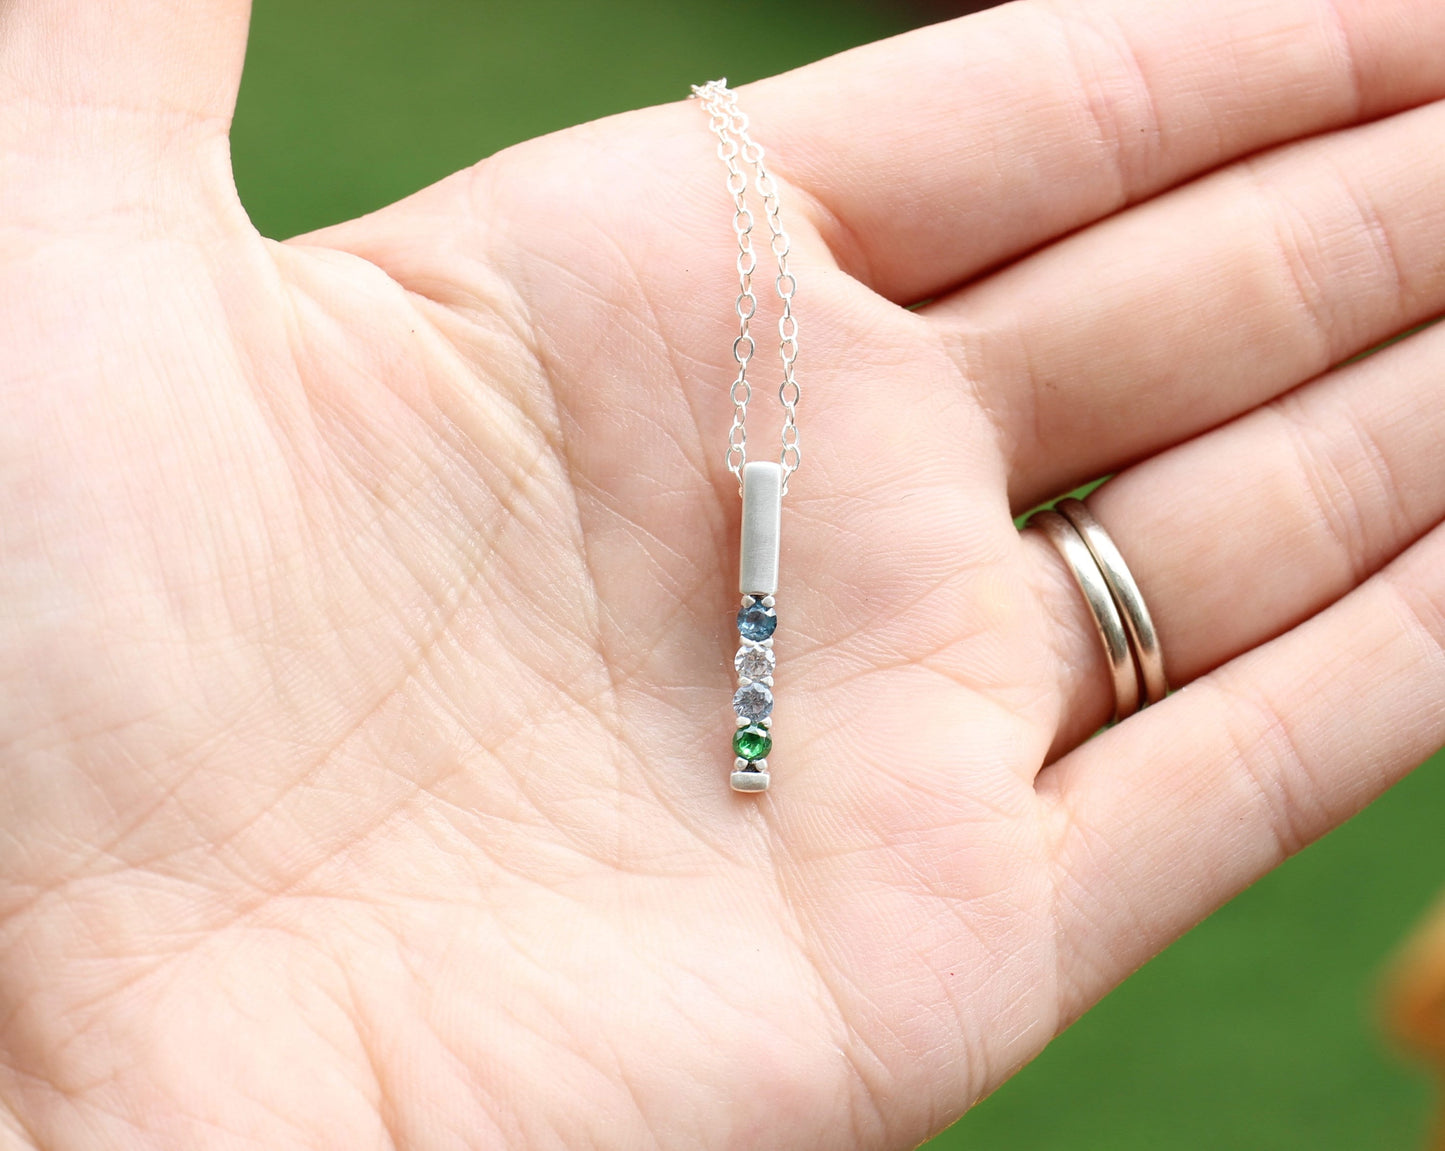 Birthstone Bar Necklace // Satin Finish Sterling Silver or Solid Gold Vertical Bar Gemstone Personalized Necklace // Custom Pendant for Mom